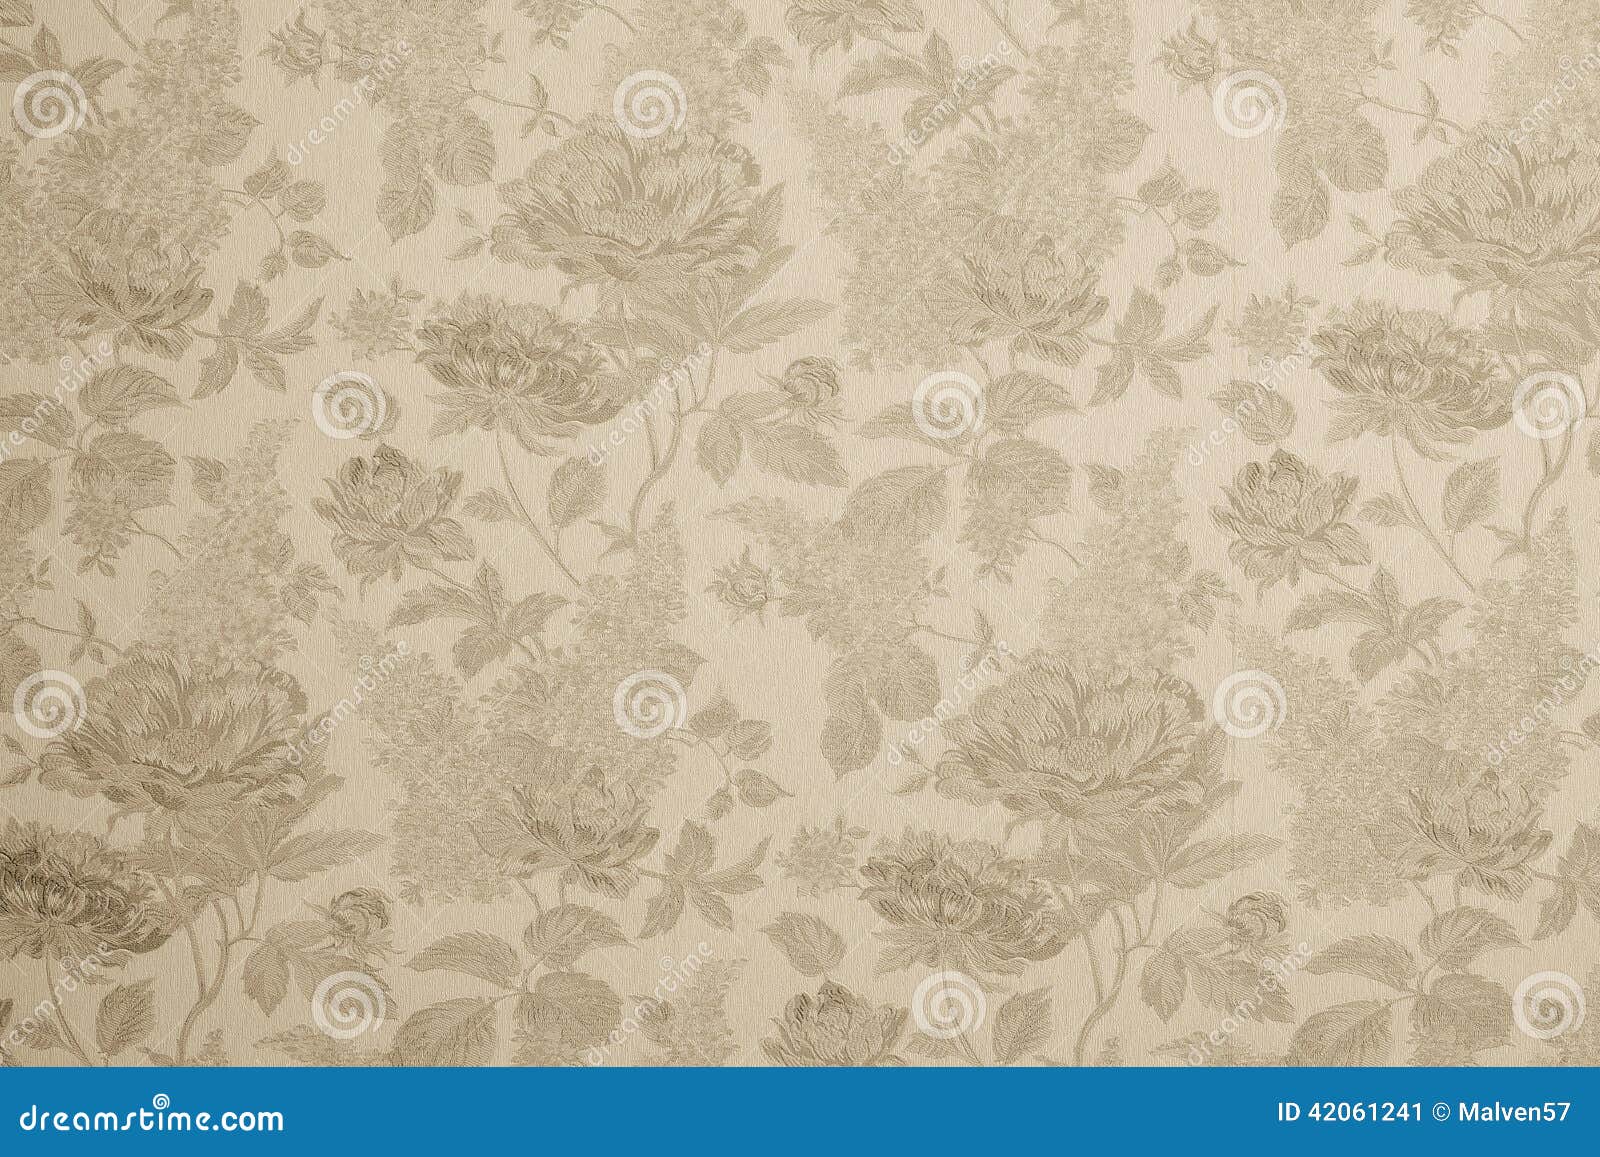 Textured Background with Flower Patterns Stock Image - Image of cream ...